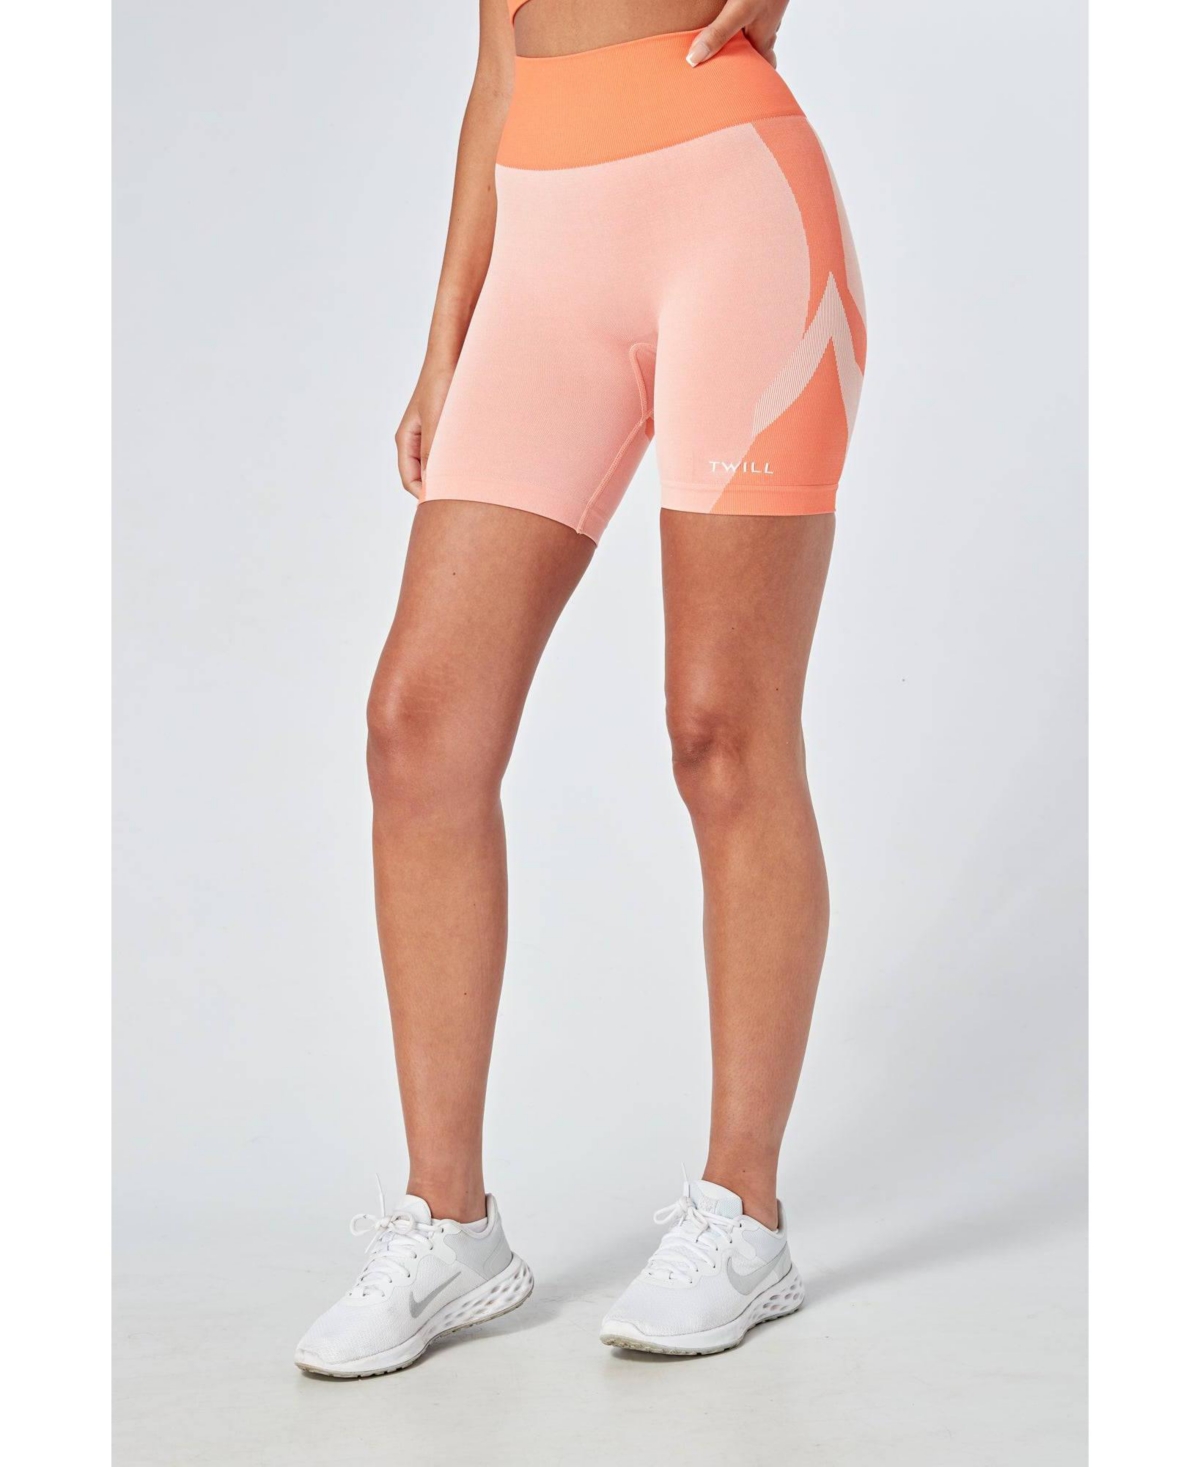 TWILL ACTIVE WOMEN'S RECYCLED COLOUR BLOCK BODY FIT CYCLING SHORTS